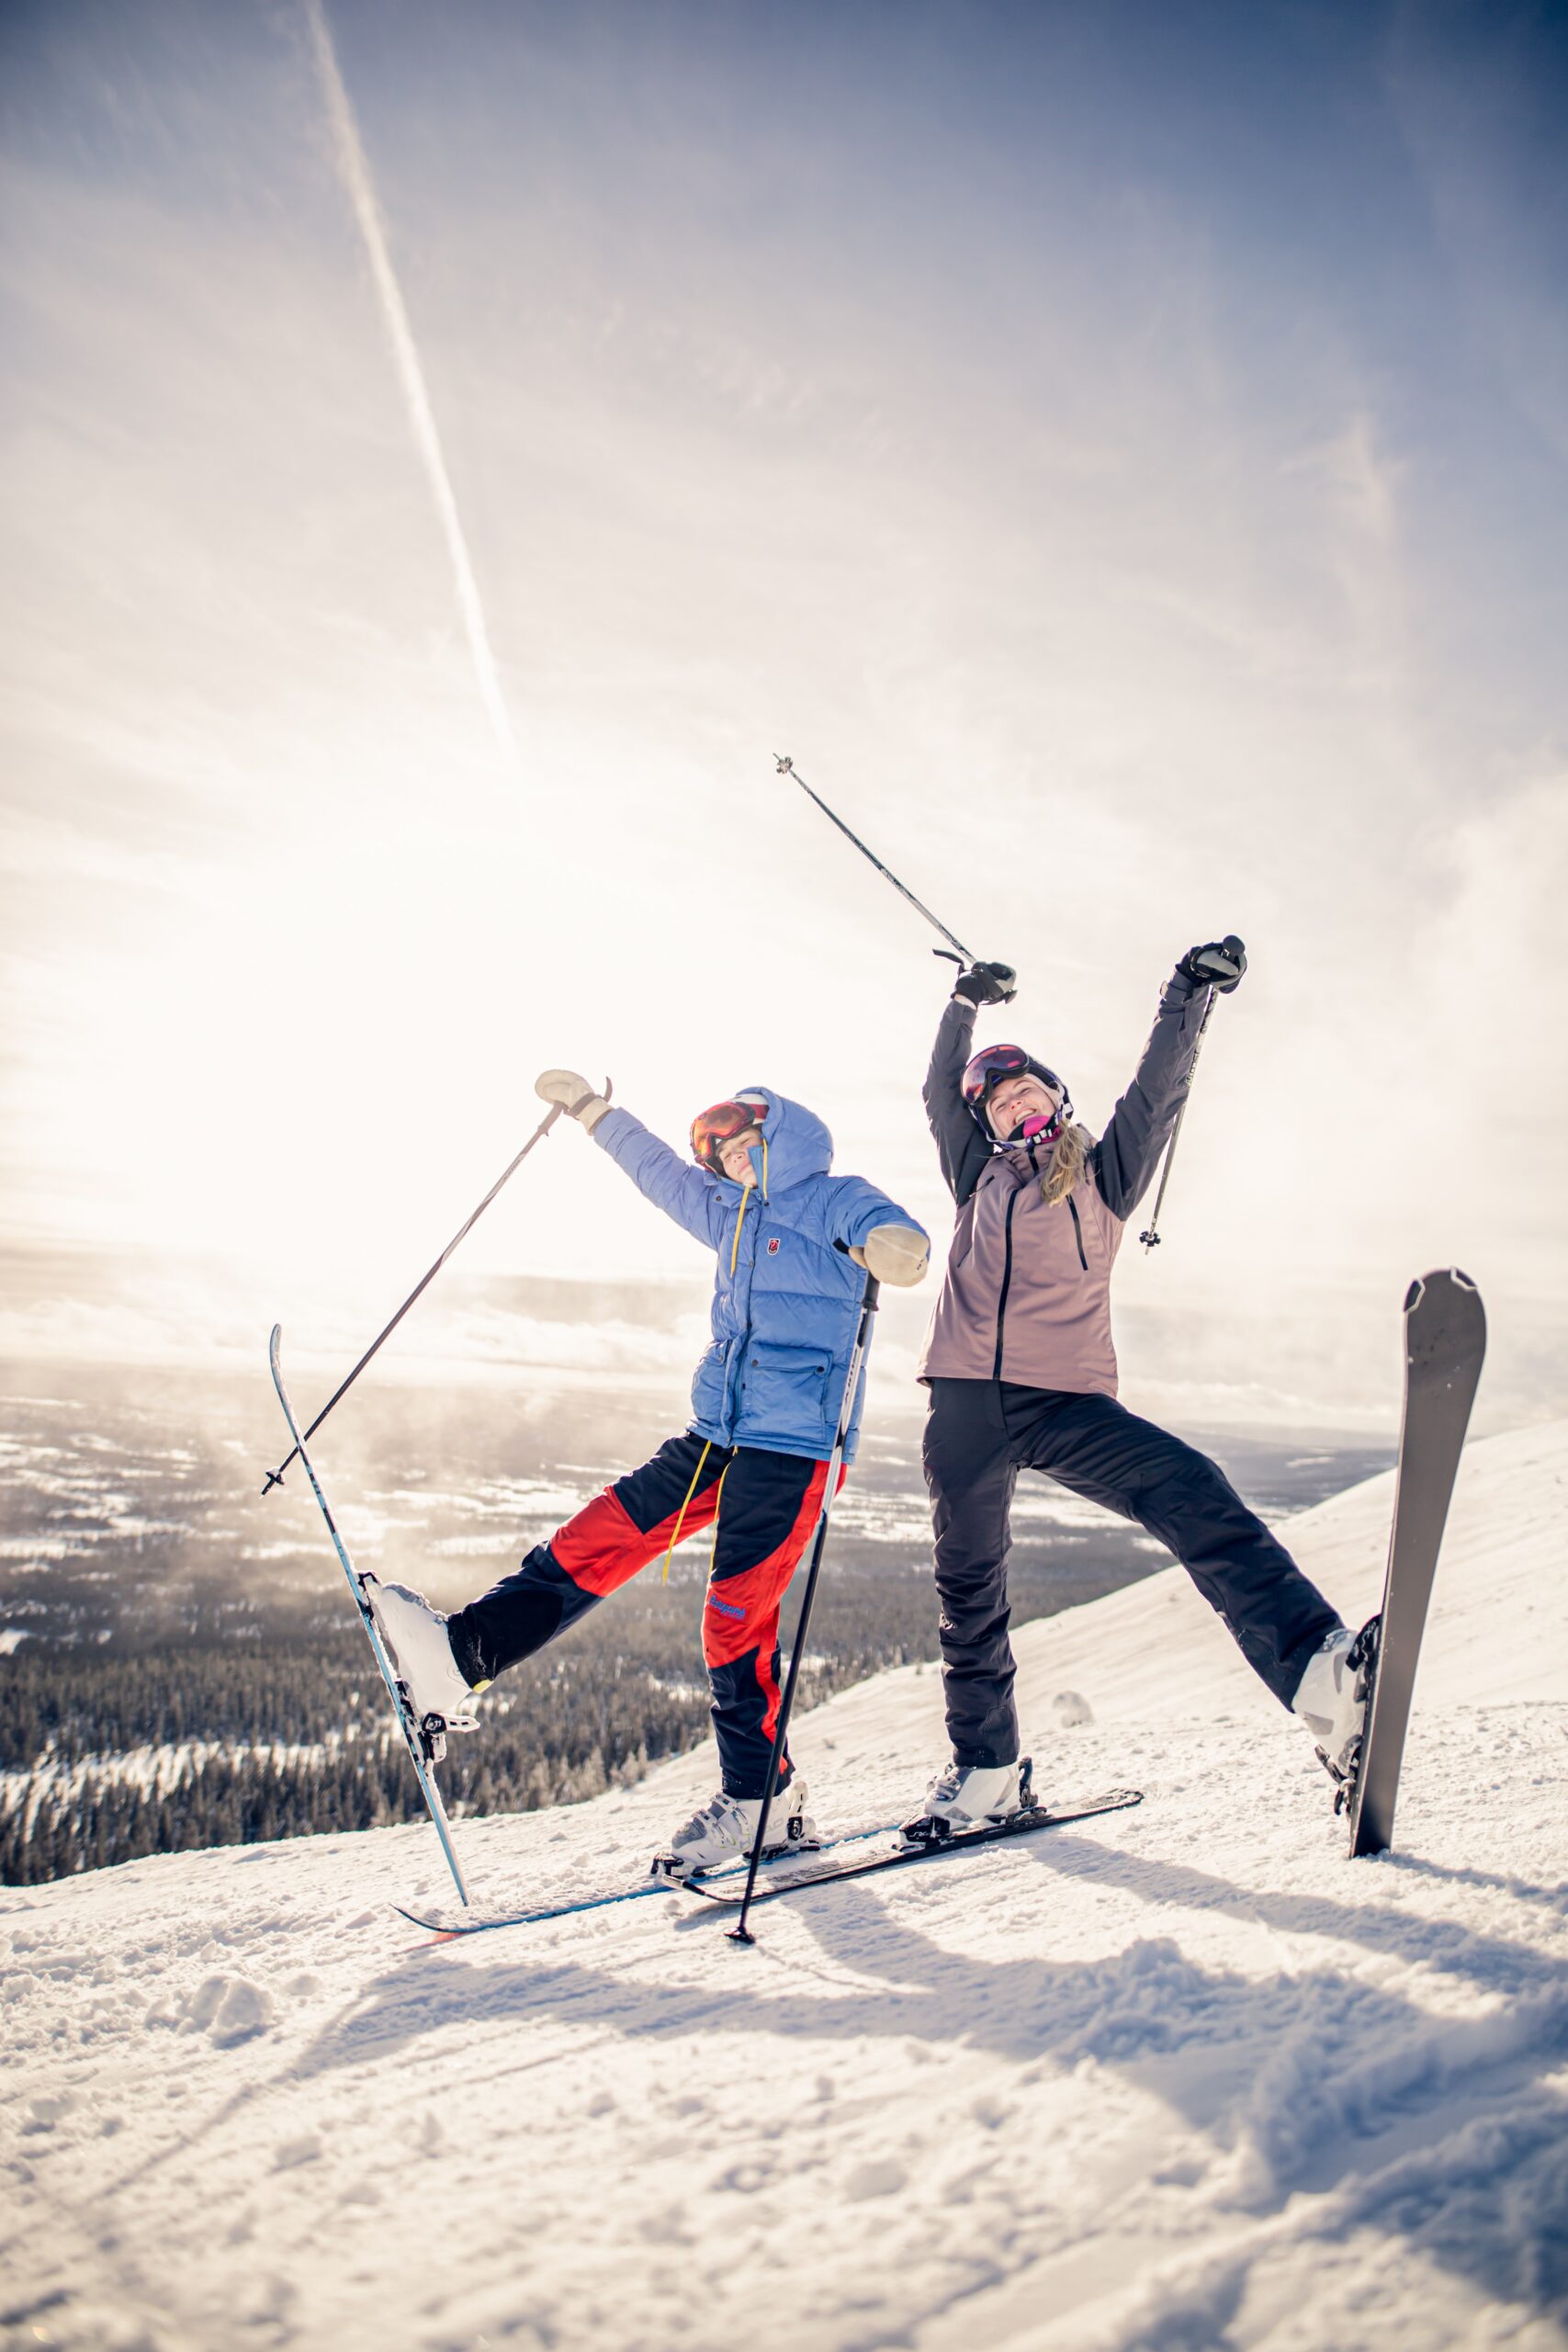 Why is it best to book your ski trip early?